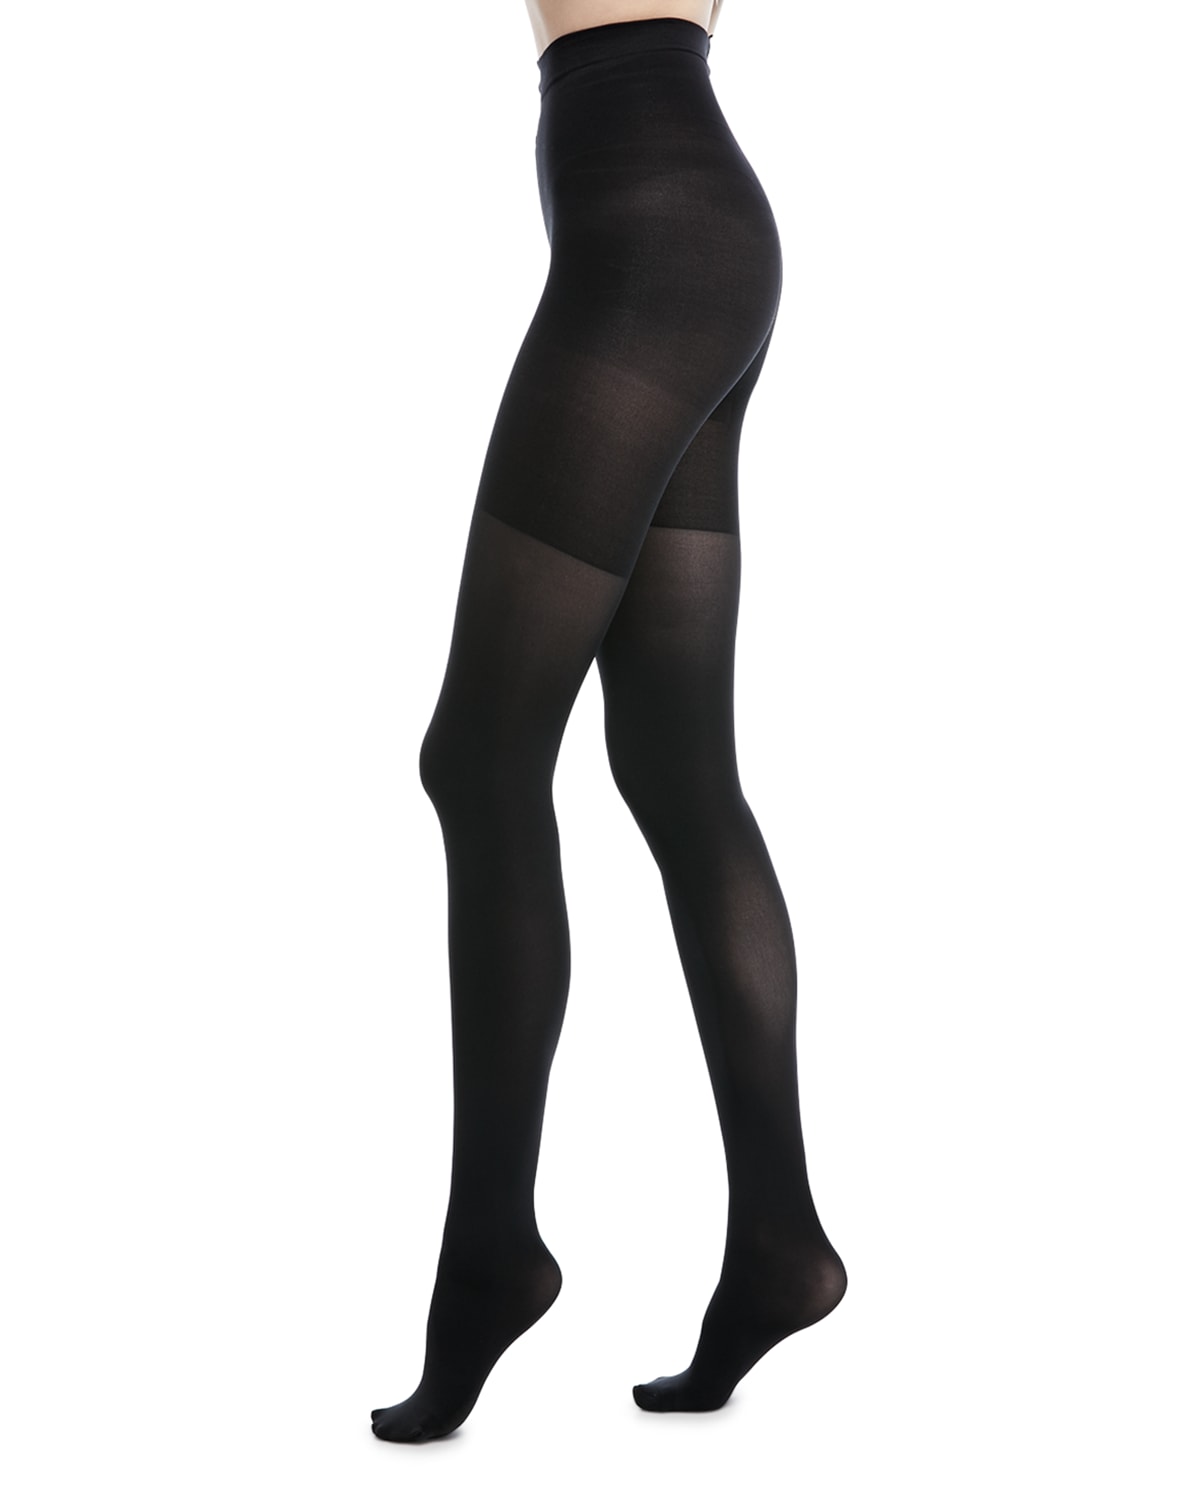 High-Waisted Luxe Tights